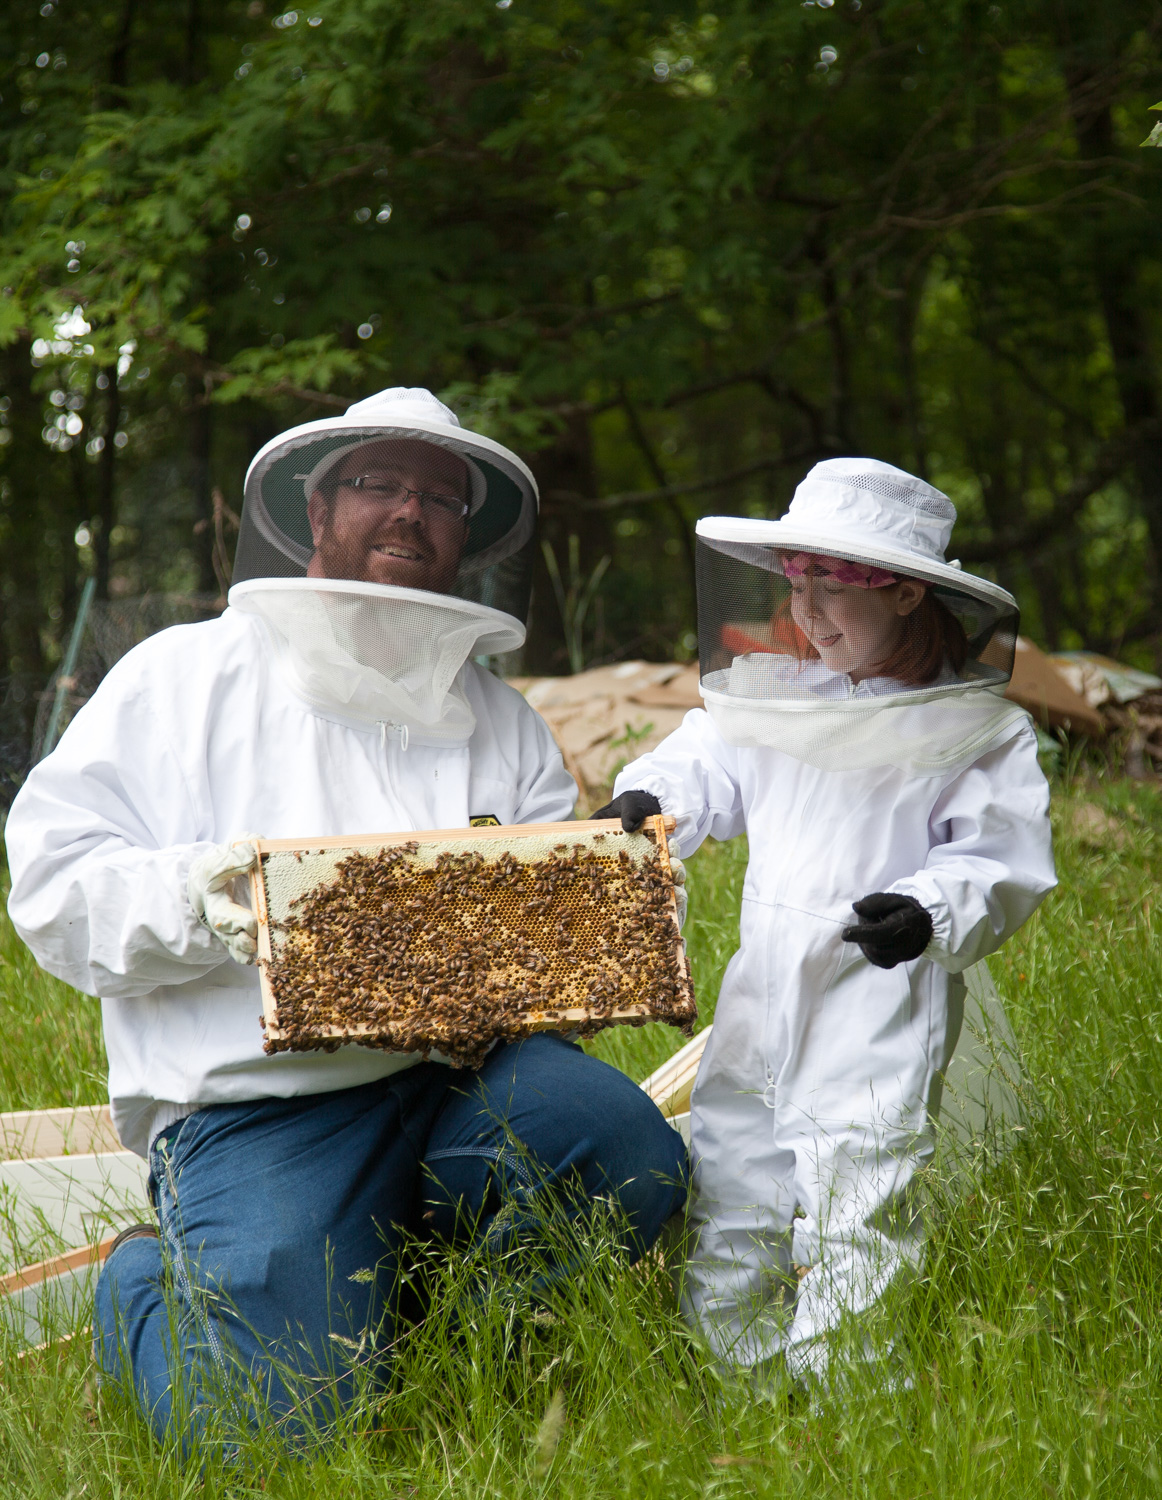 Will Thomas with daughter Kaiya Thomas in Mills River NC working with Honey Bees